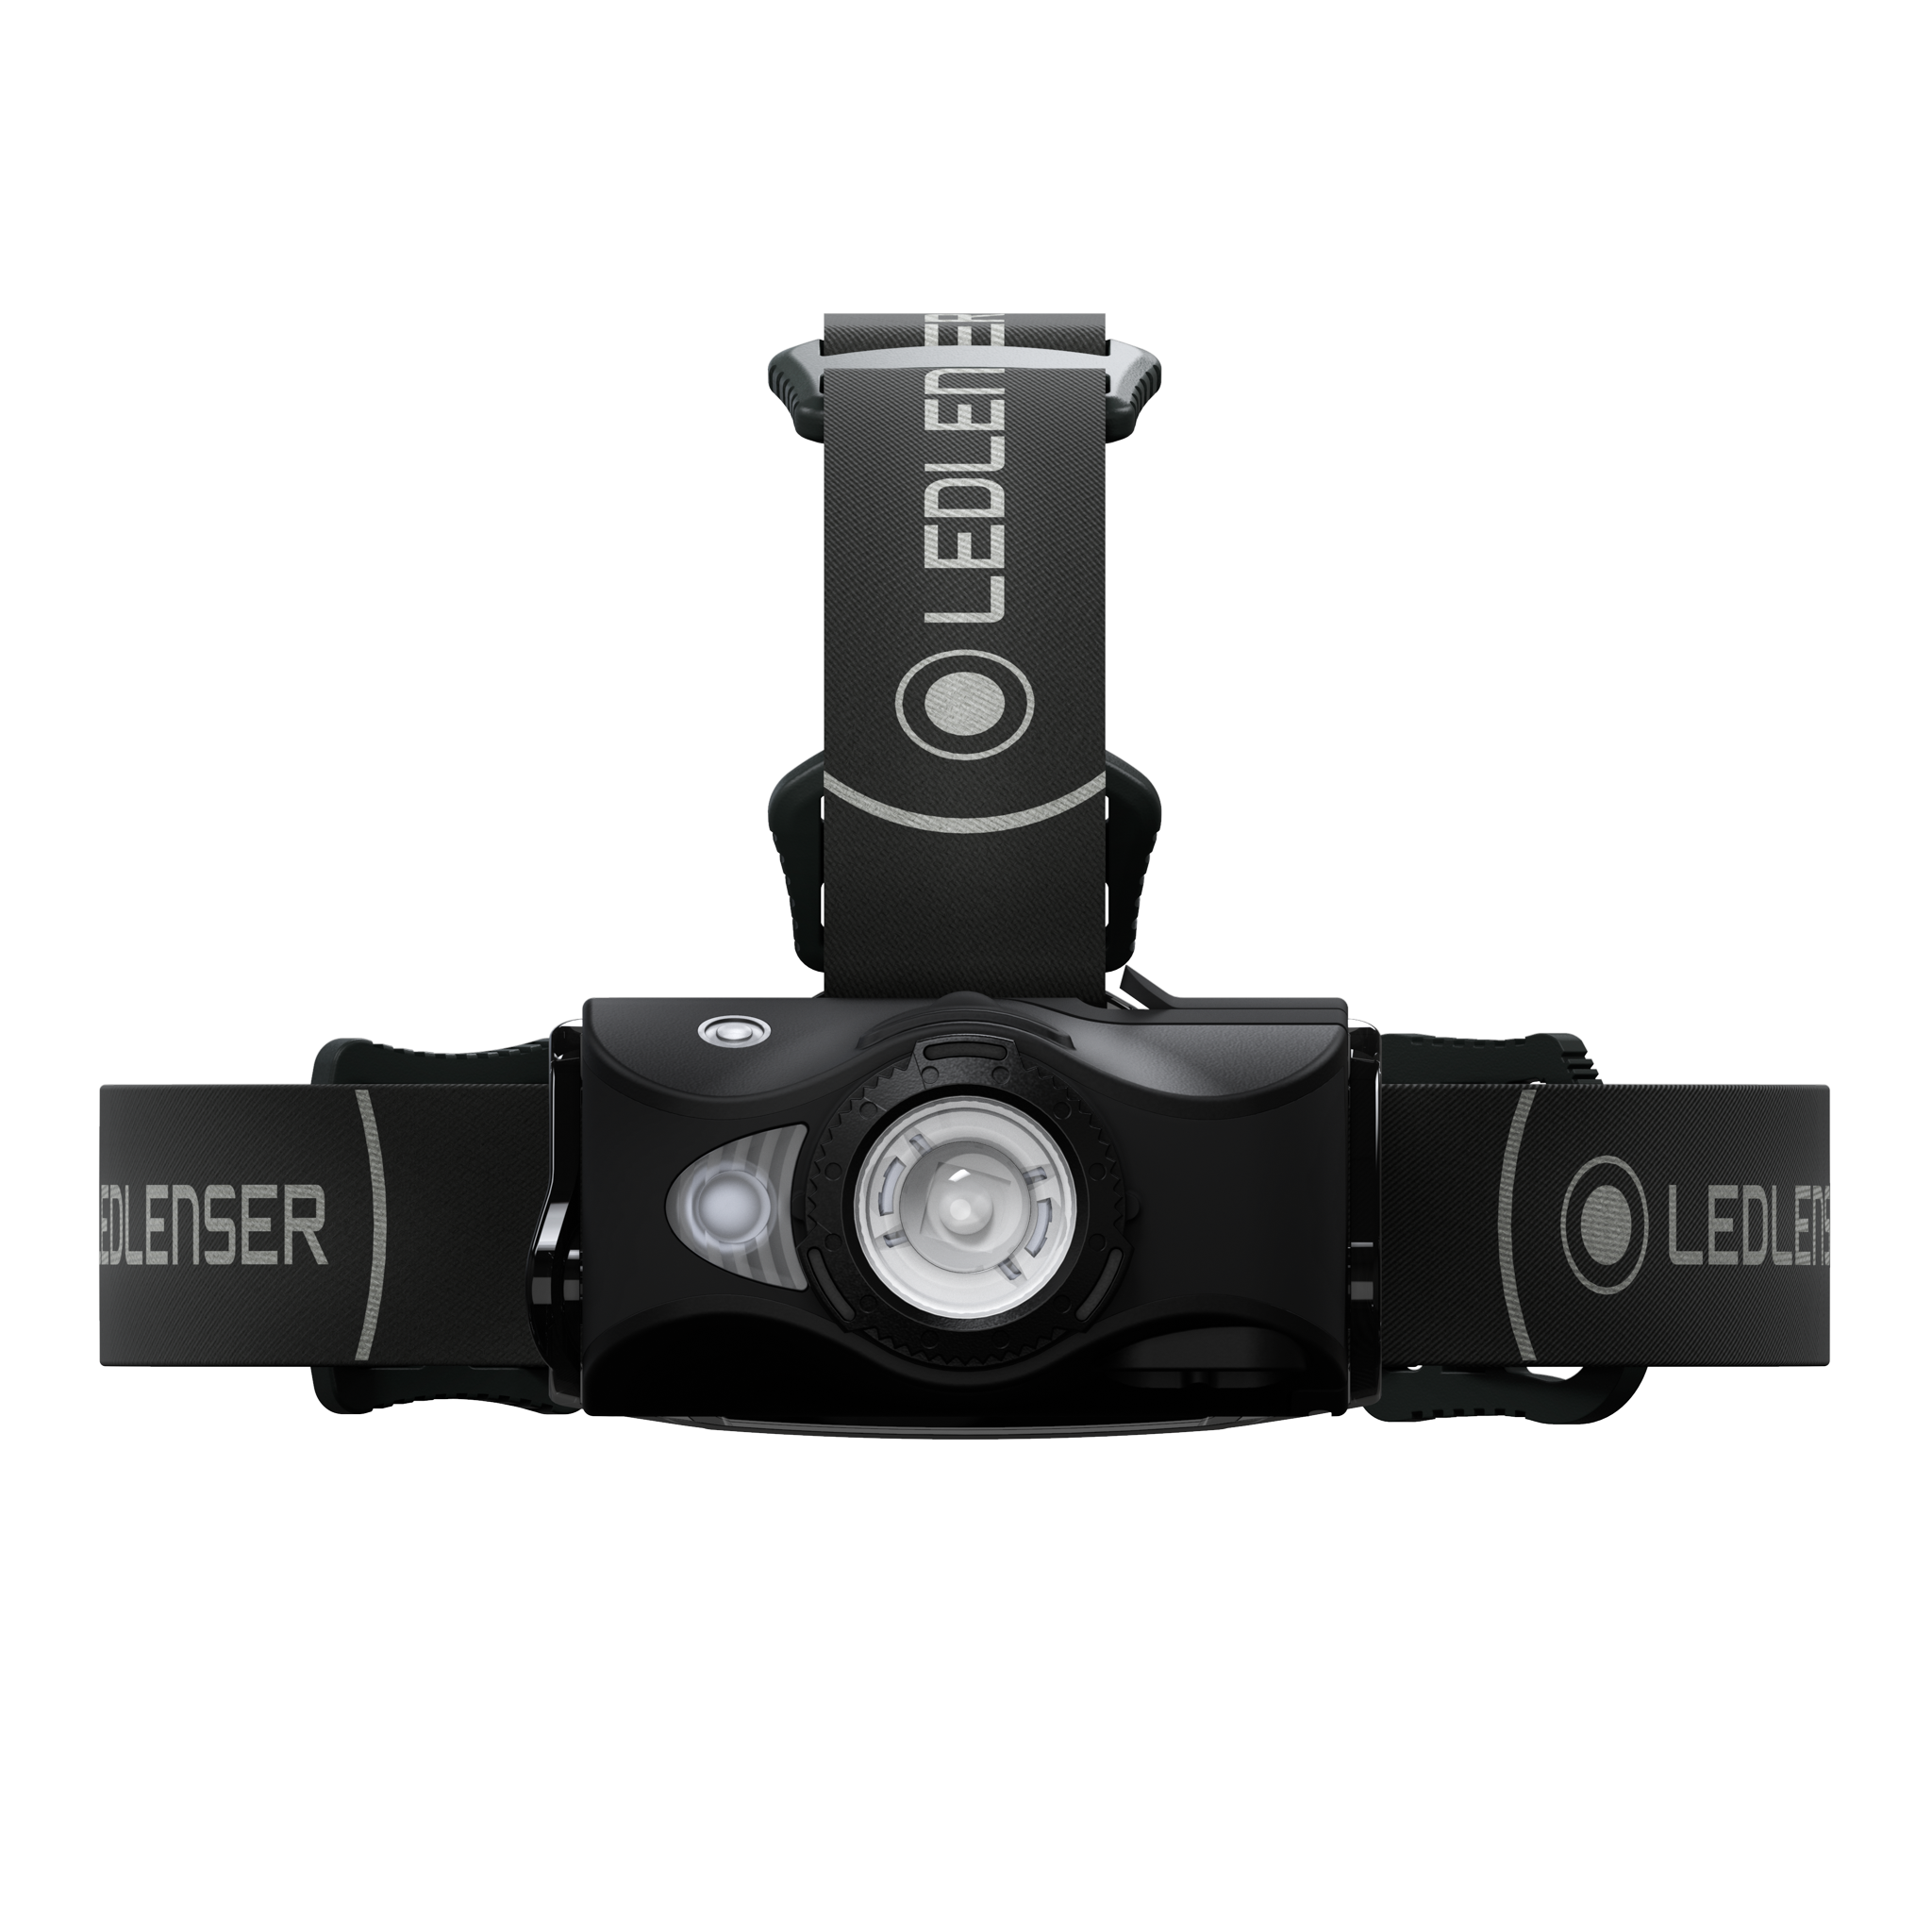 MH8 Rechargeable Outdoor Head Torch